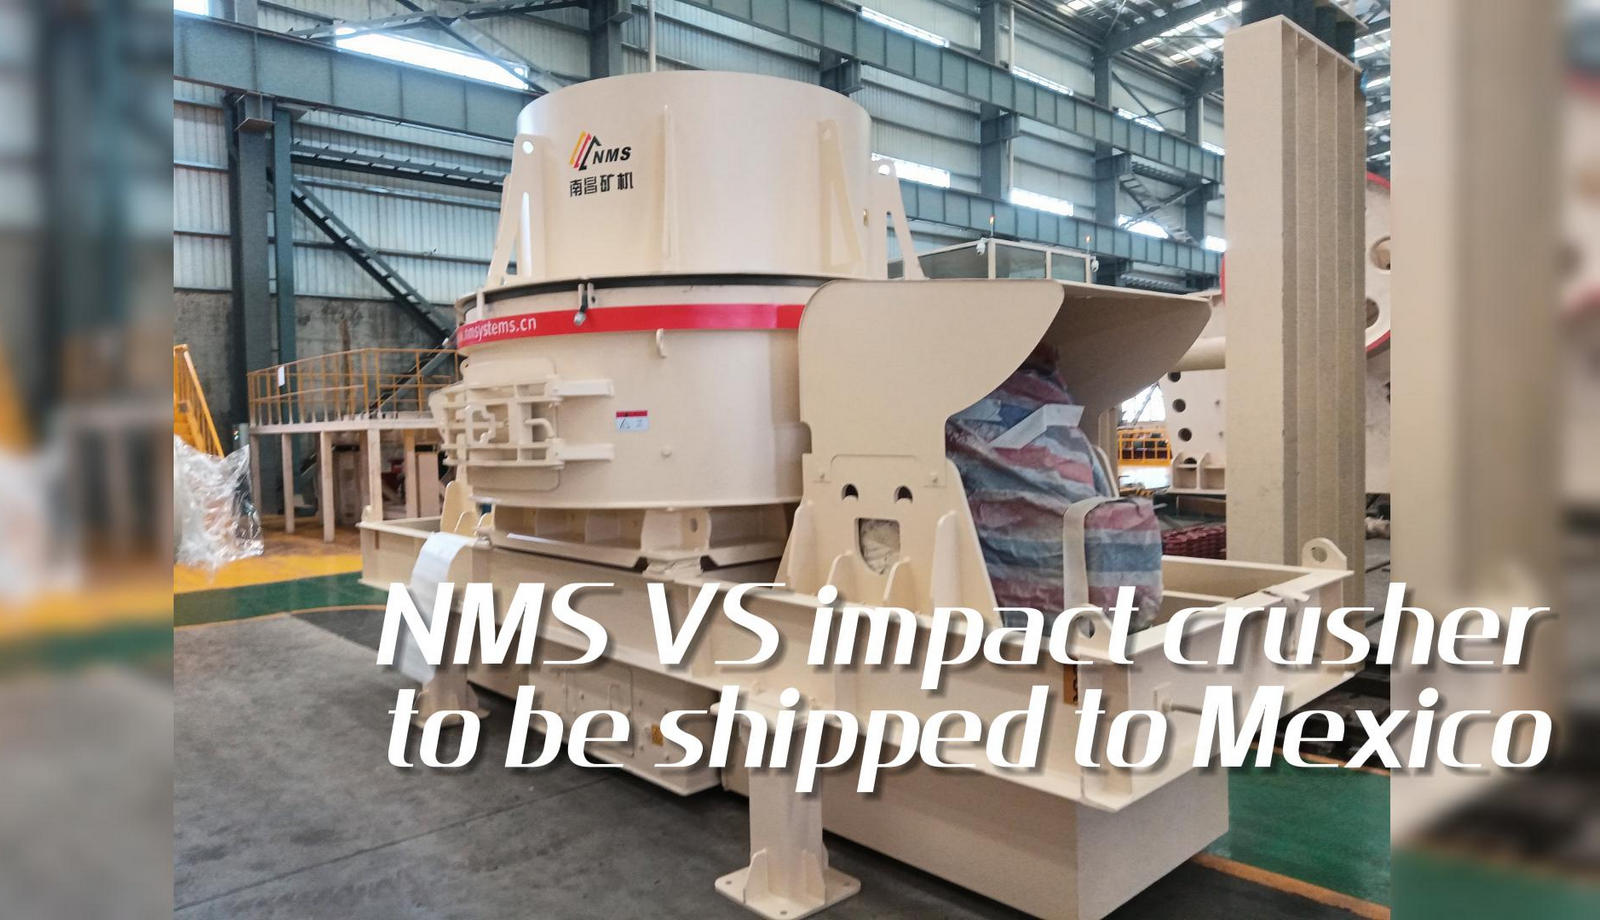 NMS VS impact crusher to be shipped to Mexico